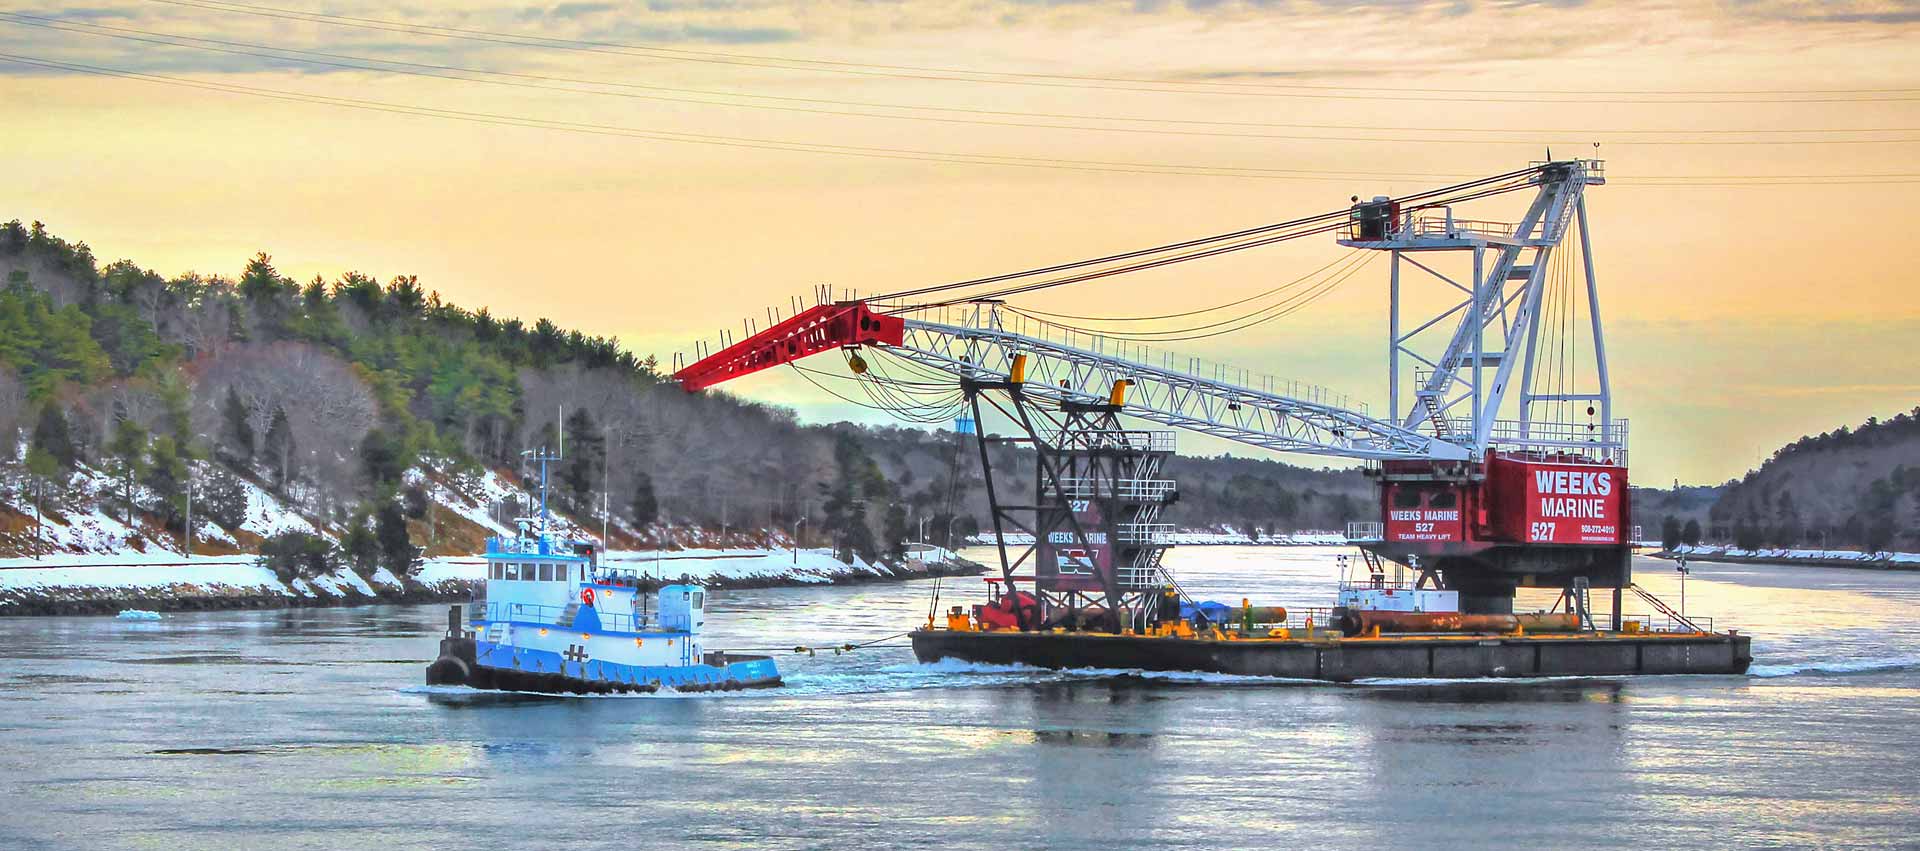 tug-boat-towing-a-crane